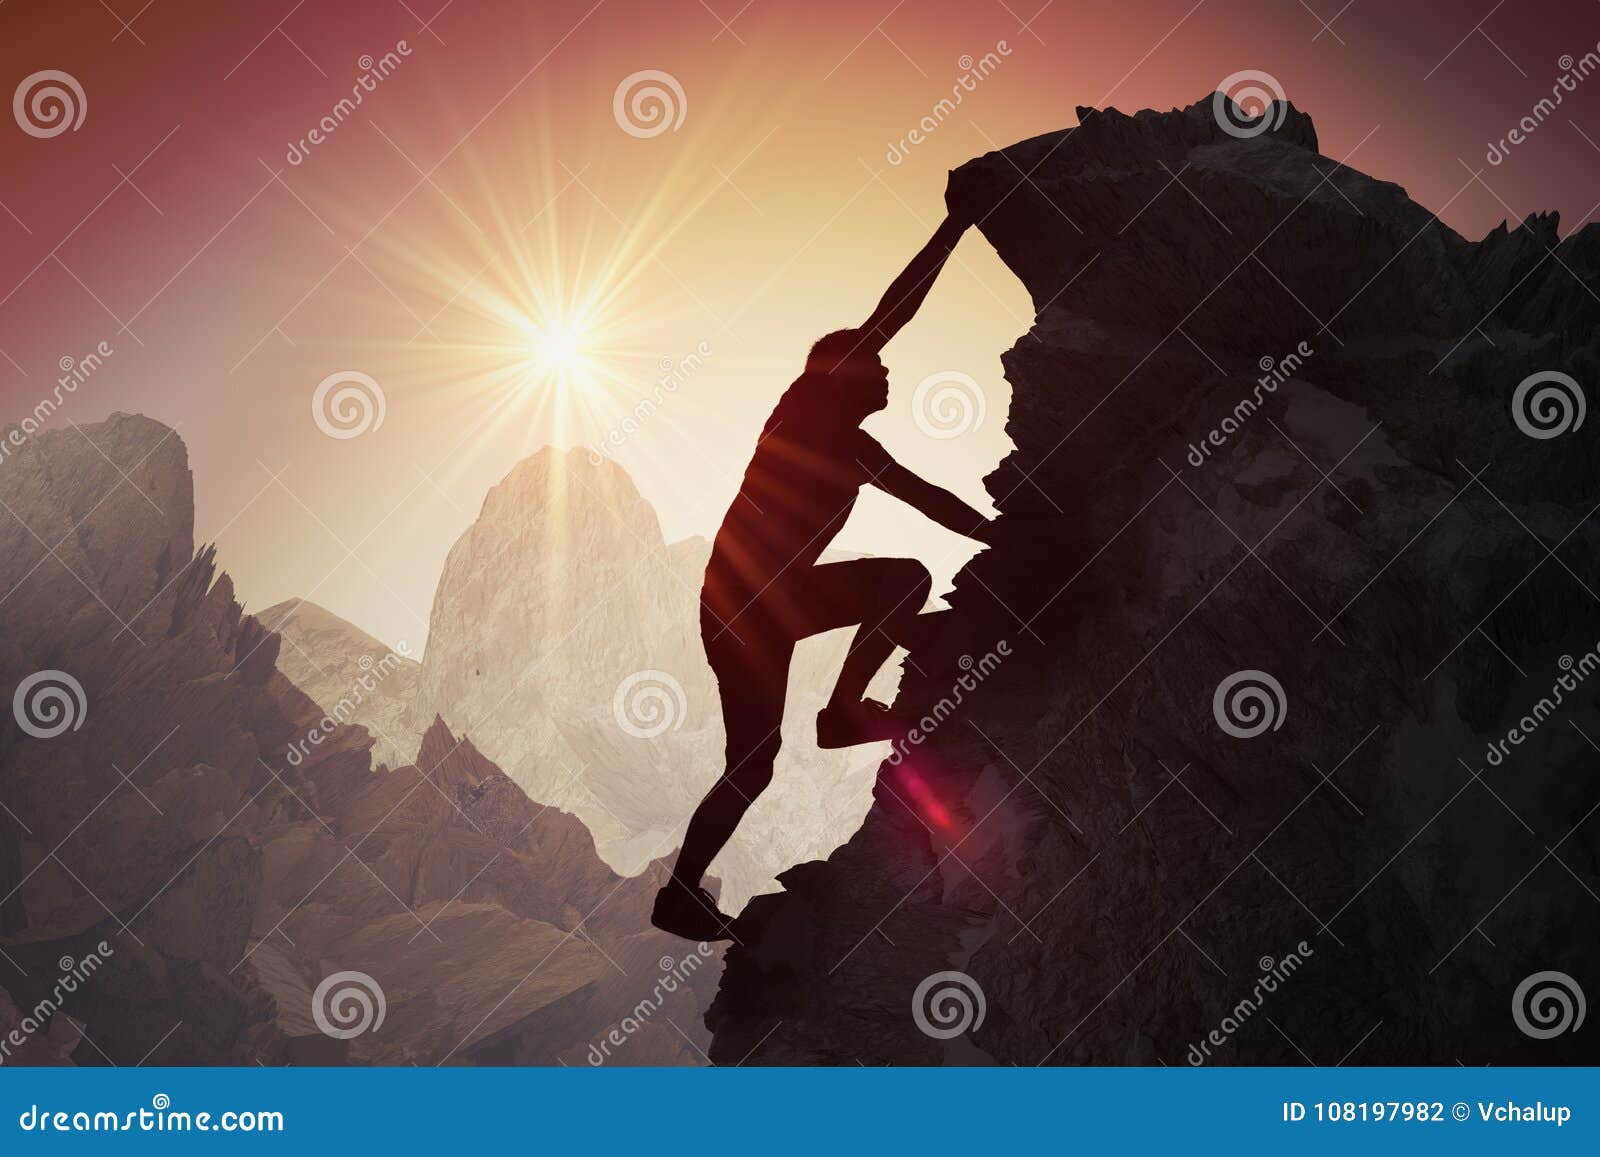 silhouette of young man climbing on mountain